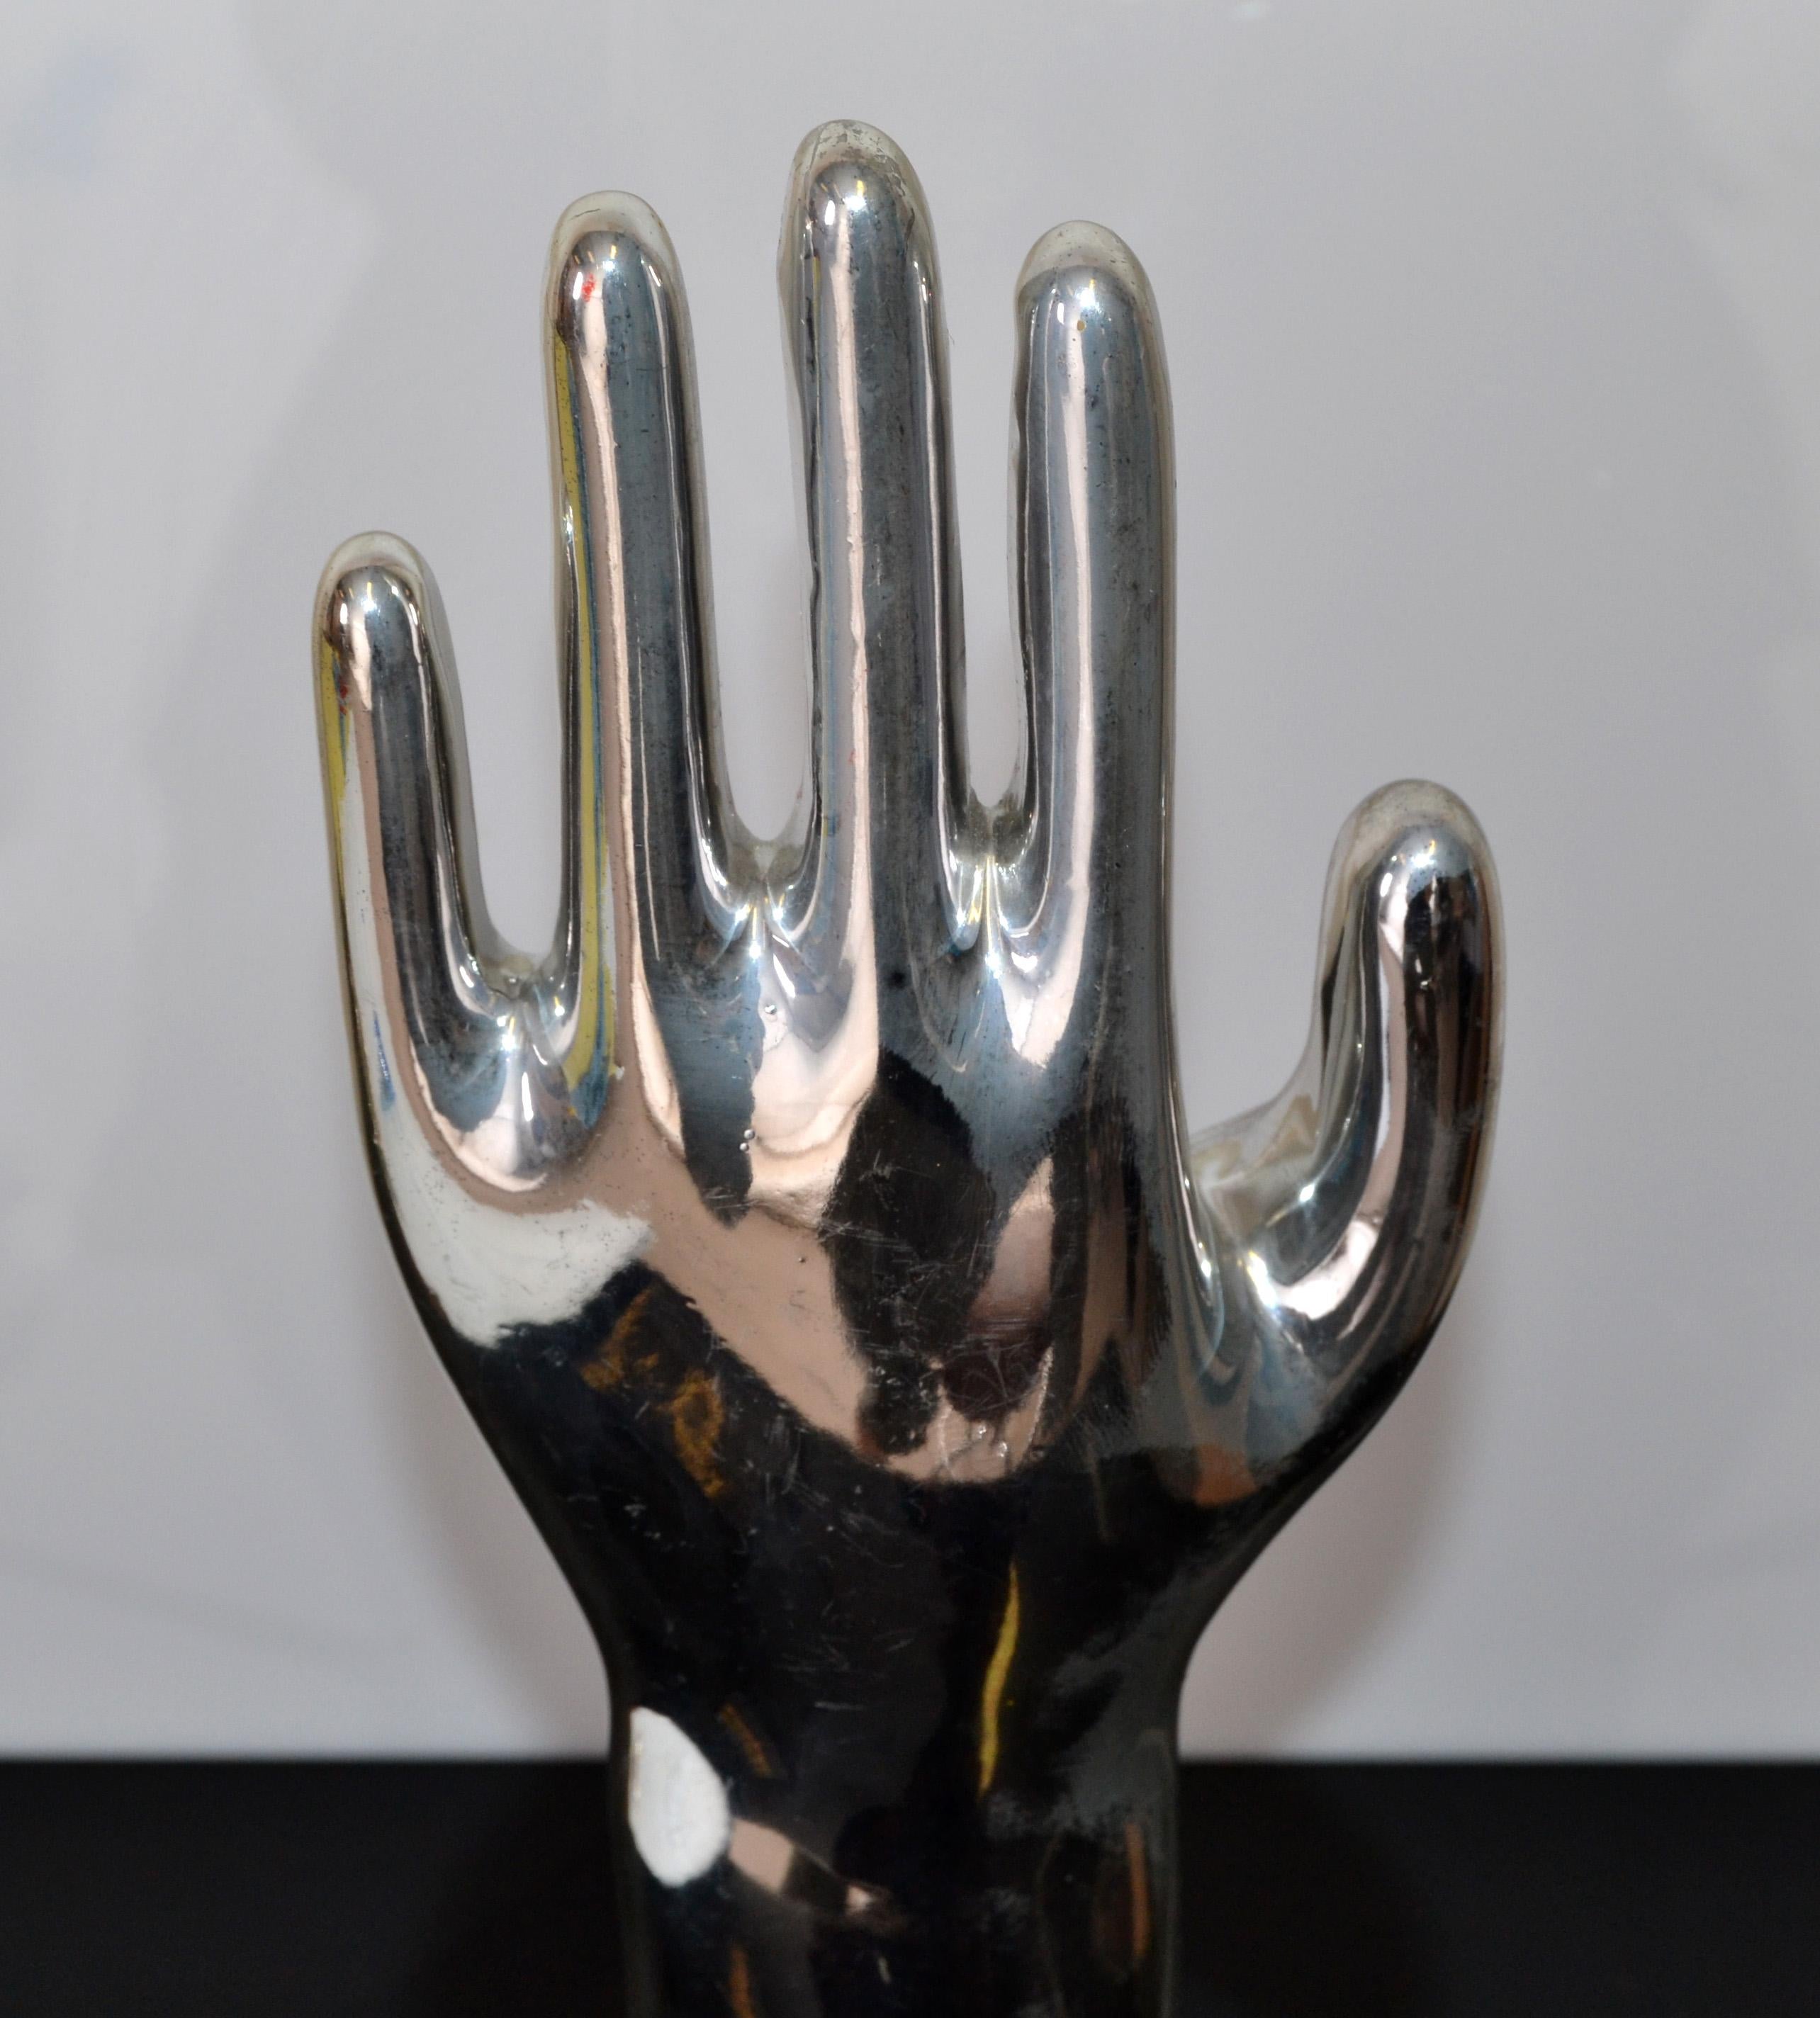 Vintage Porcelain Hand Glove Mold Nickel Plated Jewelry Stand Sculpture 1970s In Good Condition For Sale In Miami, FL